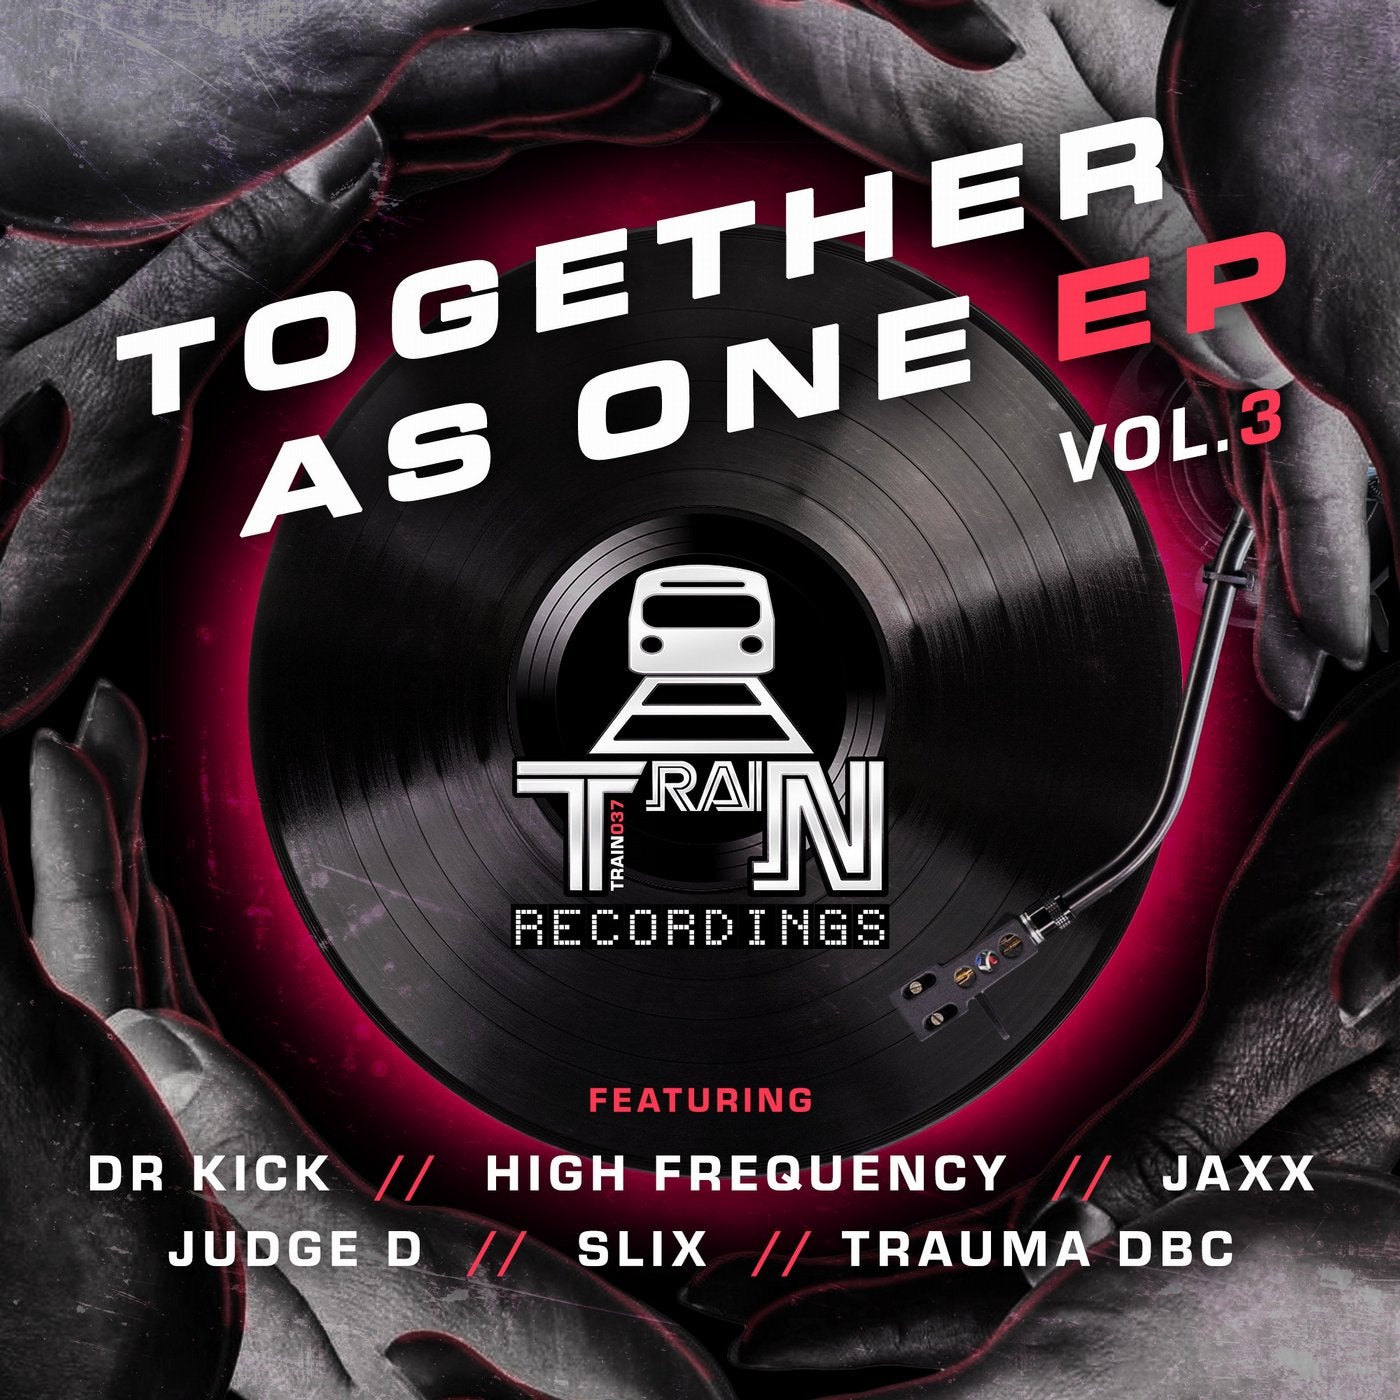 Together As One - volume 3